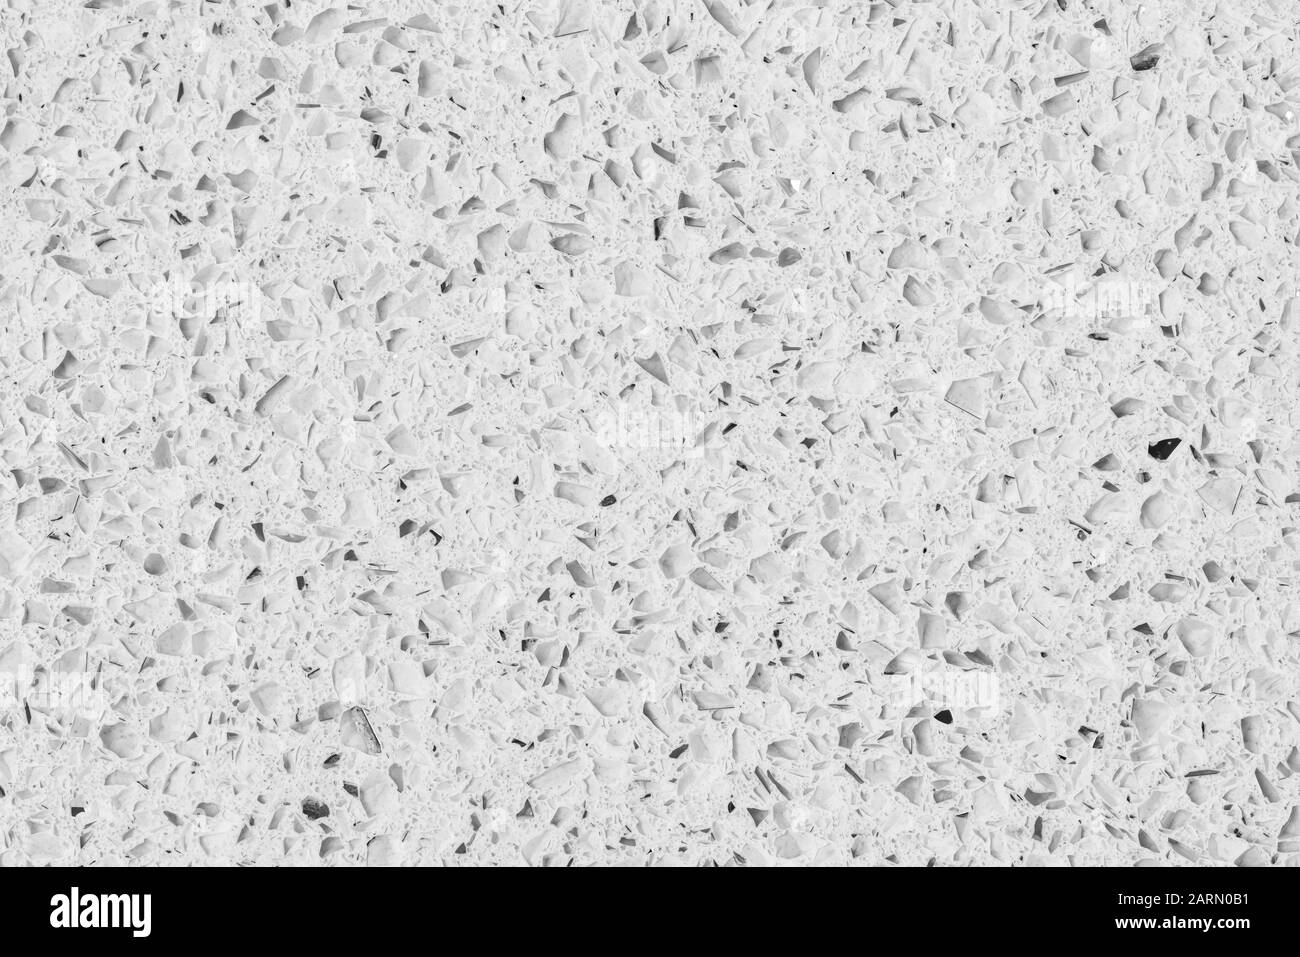 Quartz surface white for bathroom or kitchen countertop. High resolution texture and pattern. Stock Photo